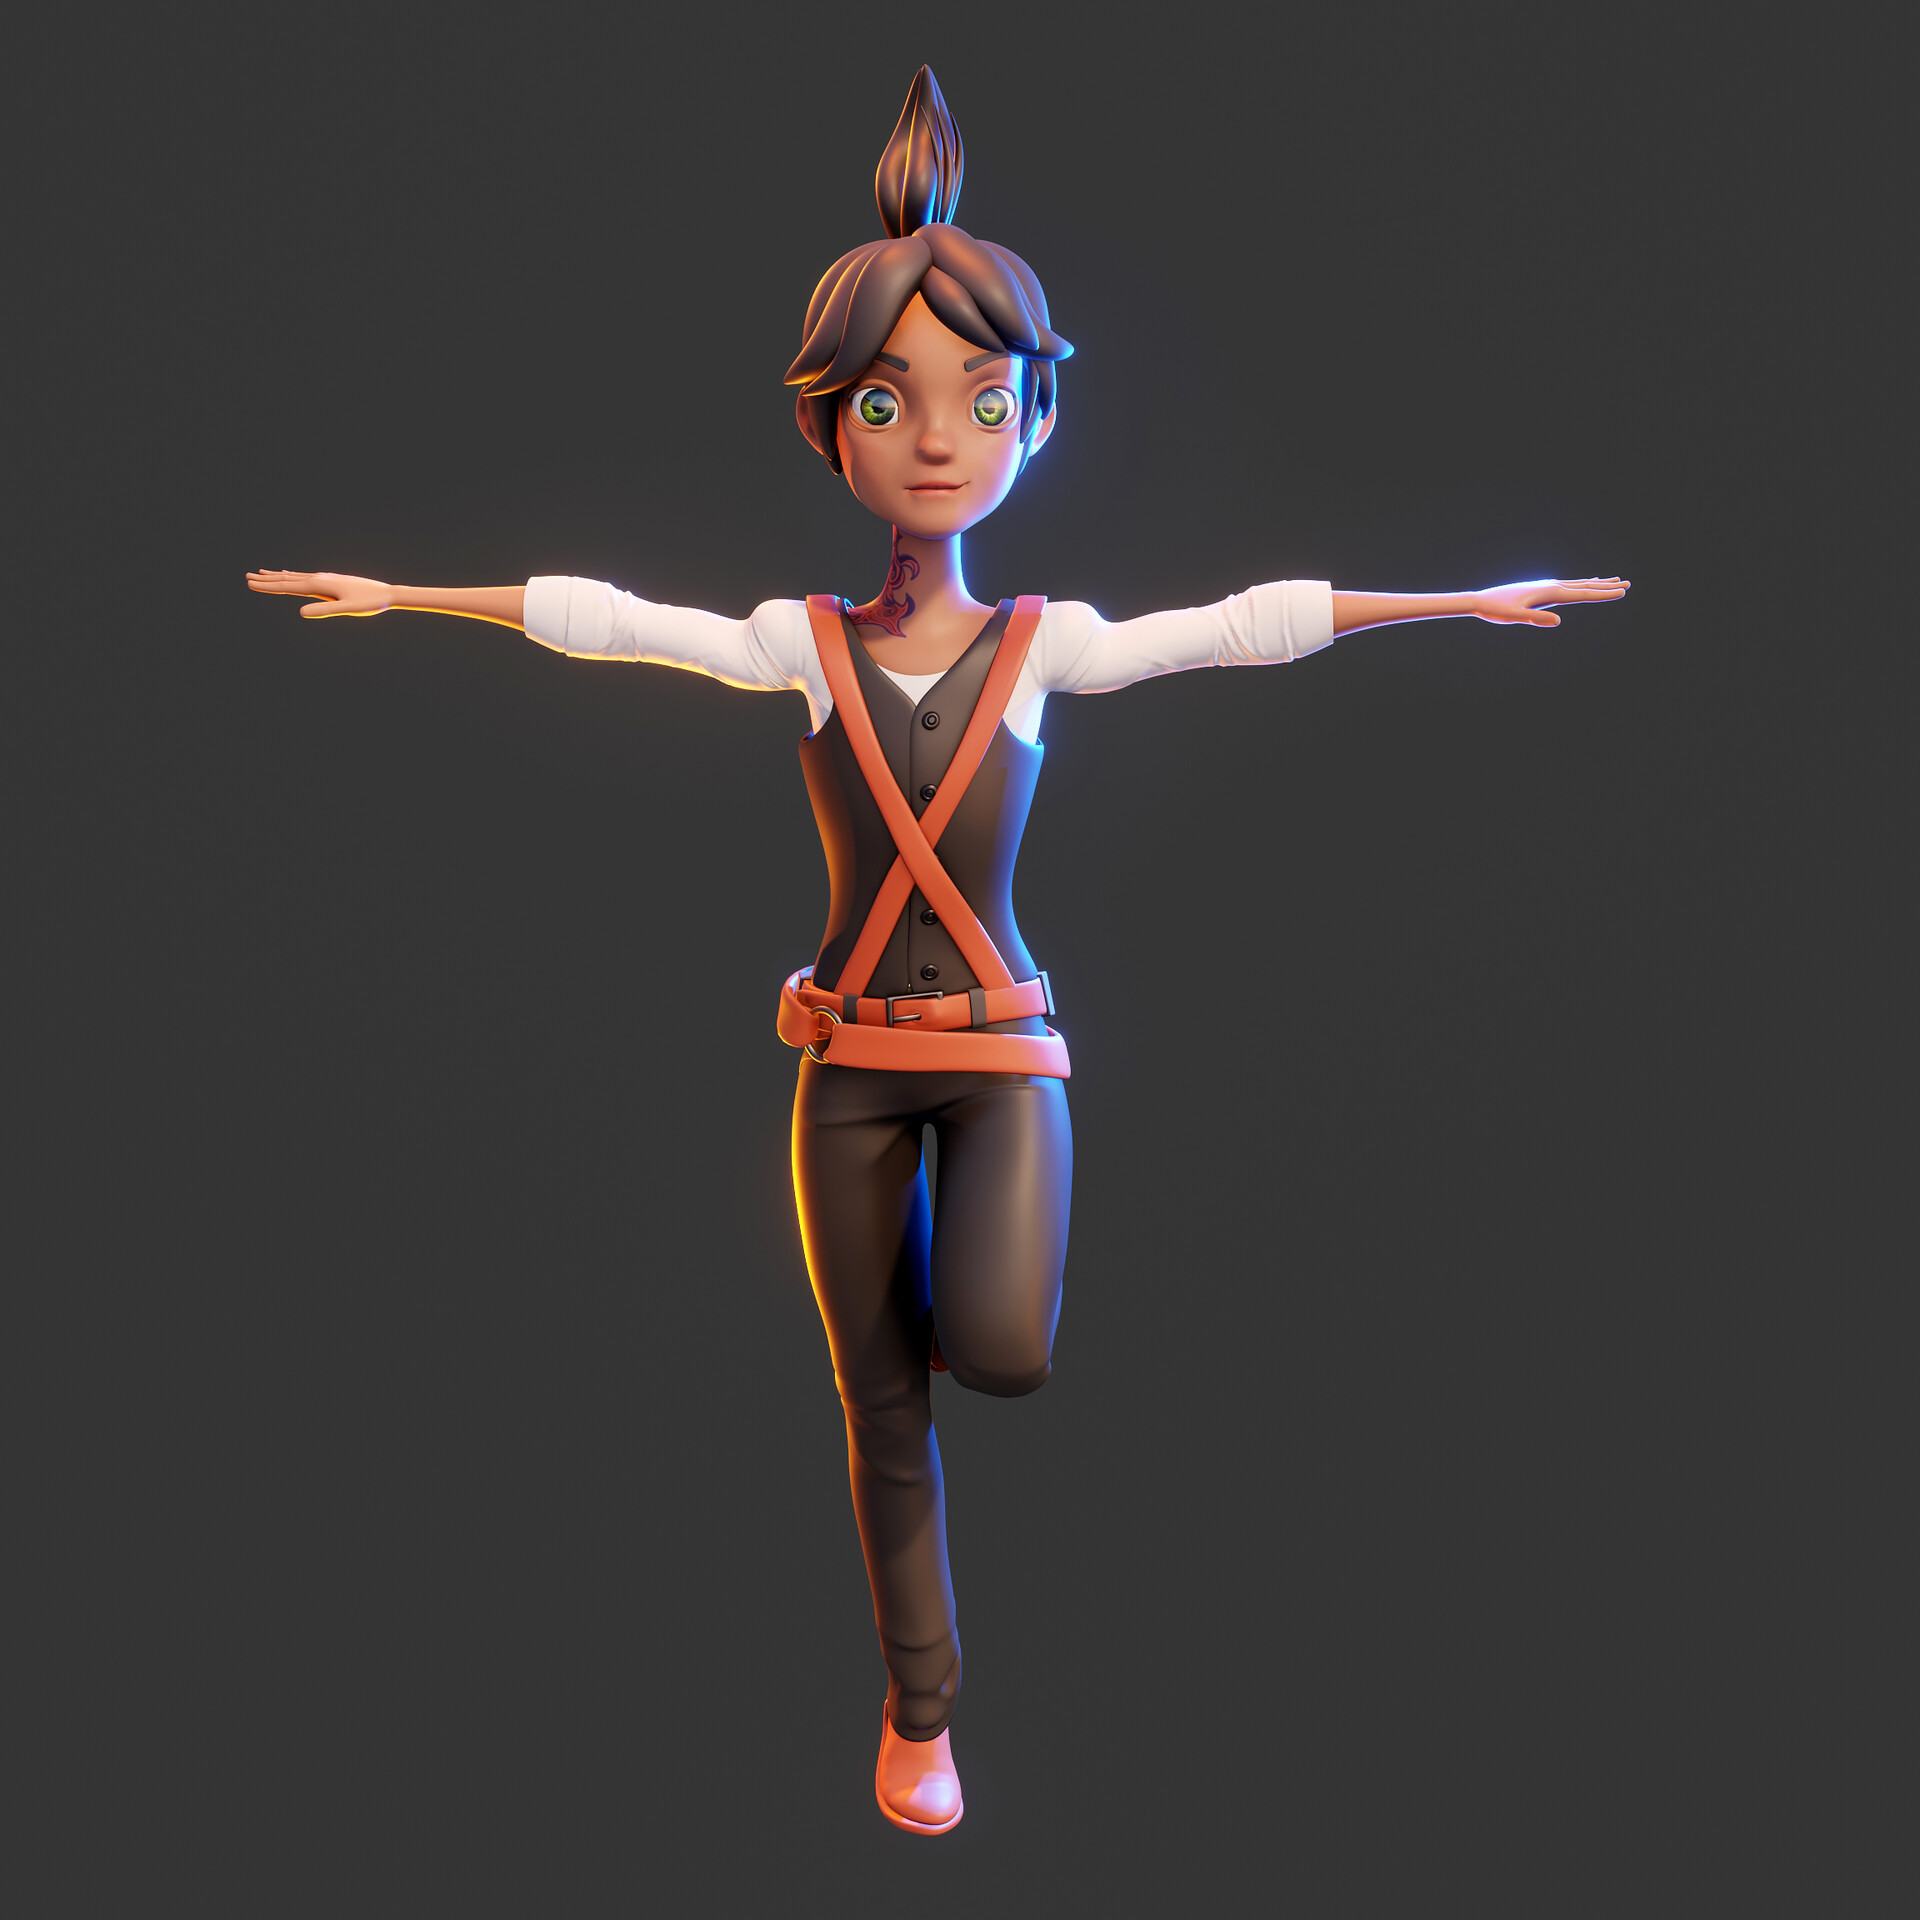 ArtStation - Start to rig the character's clothes - Blender 3D ...